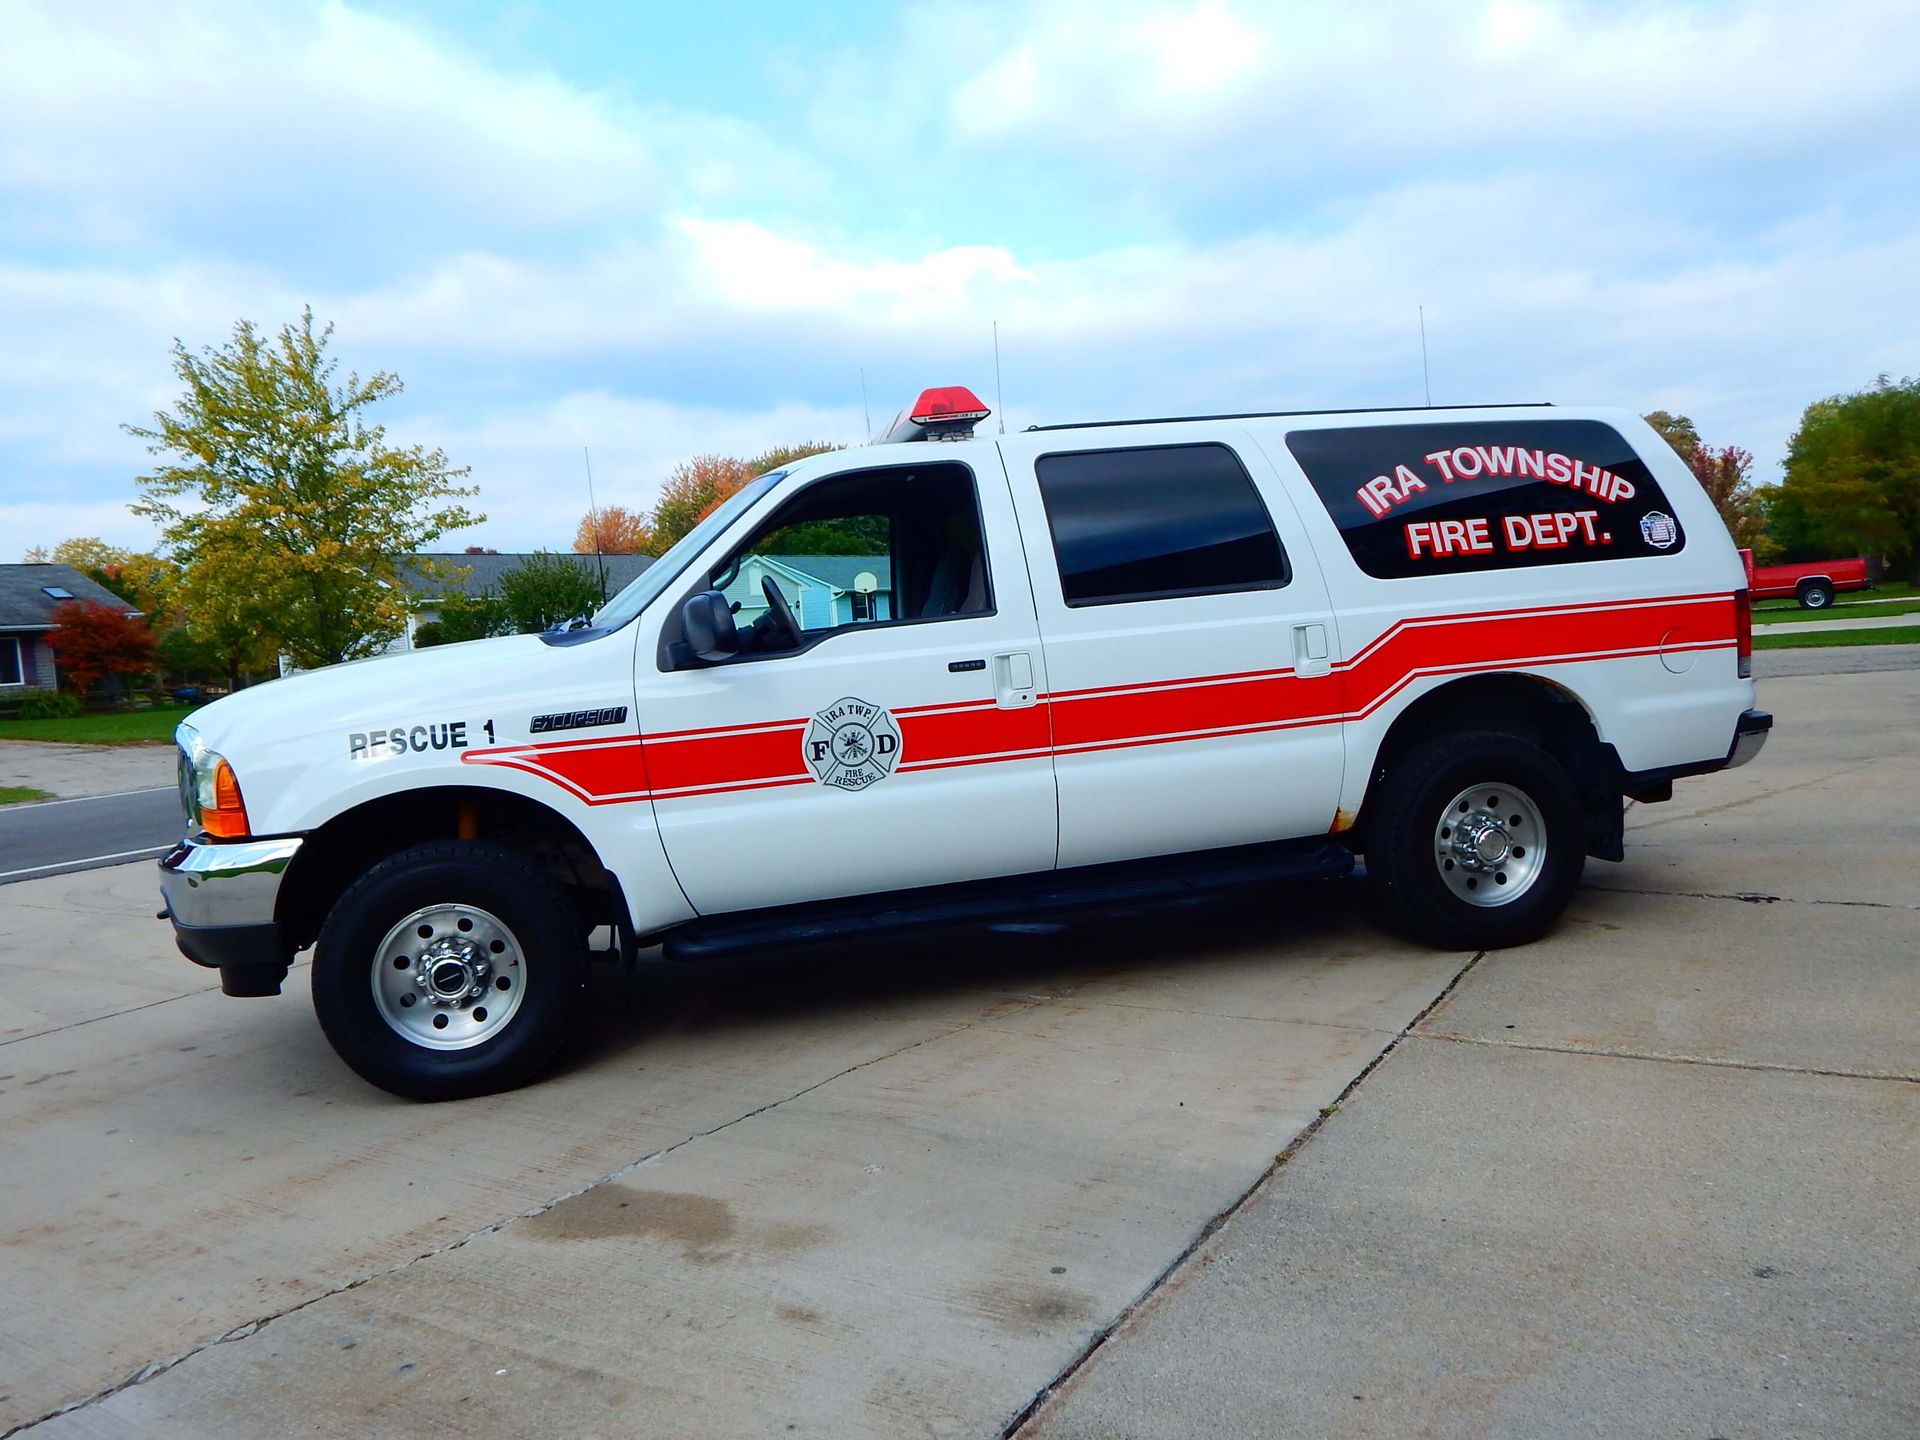 A white rescue vehicle is parked in front of a building that says Ira Township Fire Department.